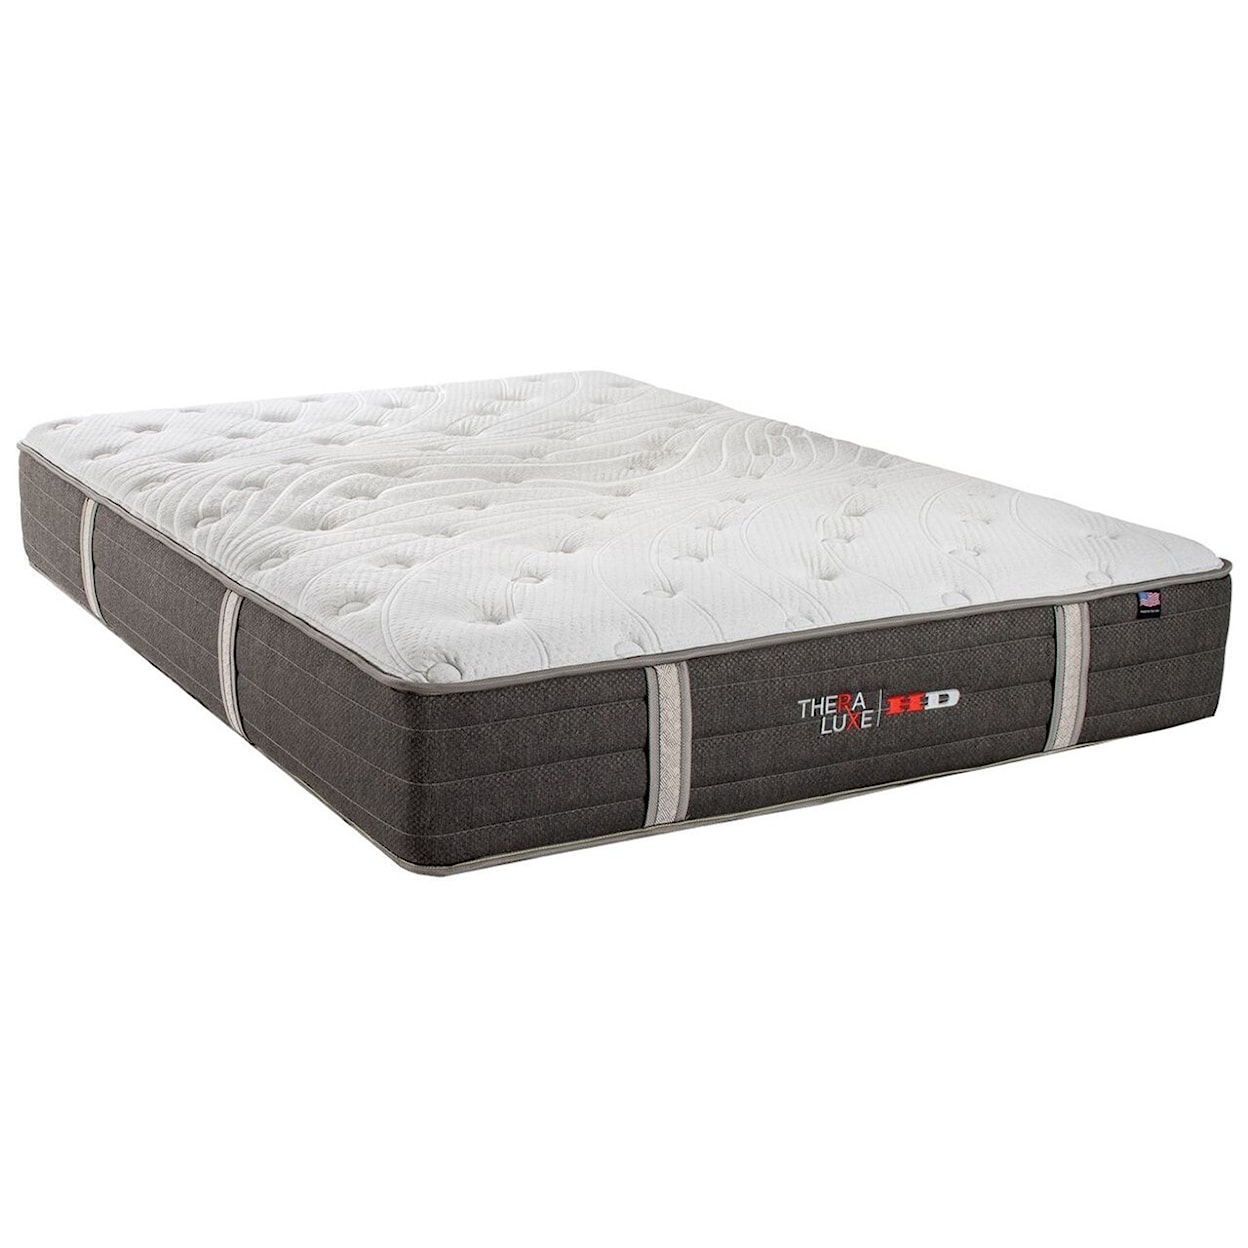 Therapedic Thera Luxe HD Balsam King Firm Pocketed Coil Mattress